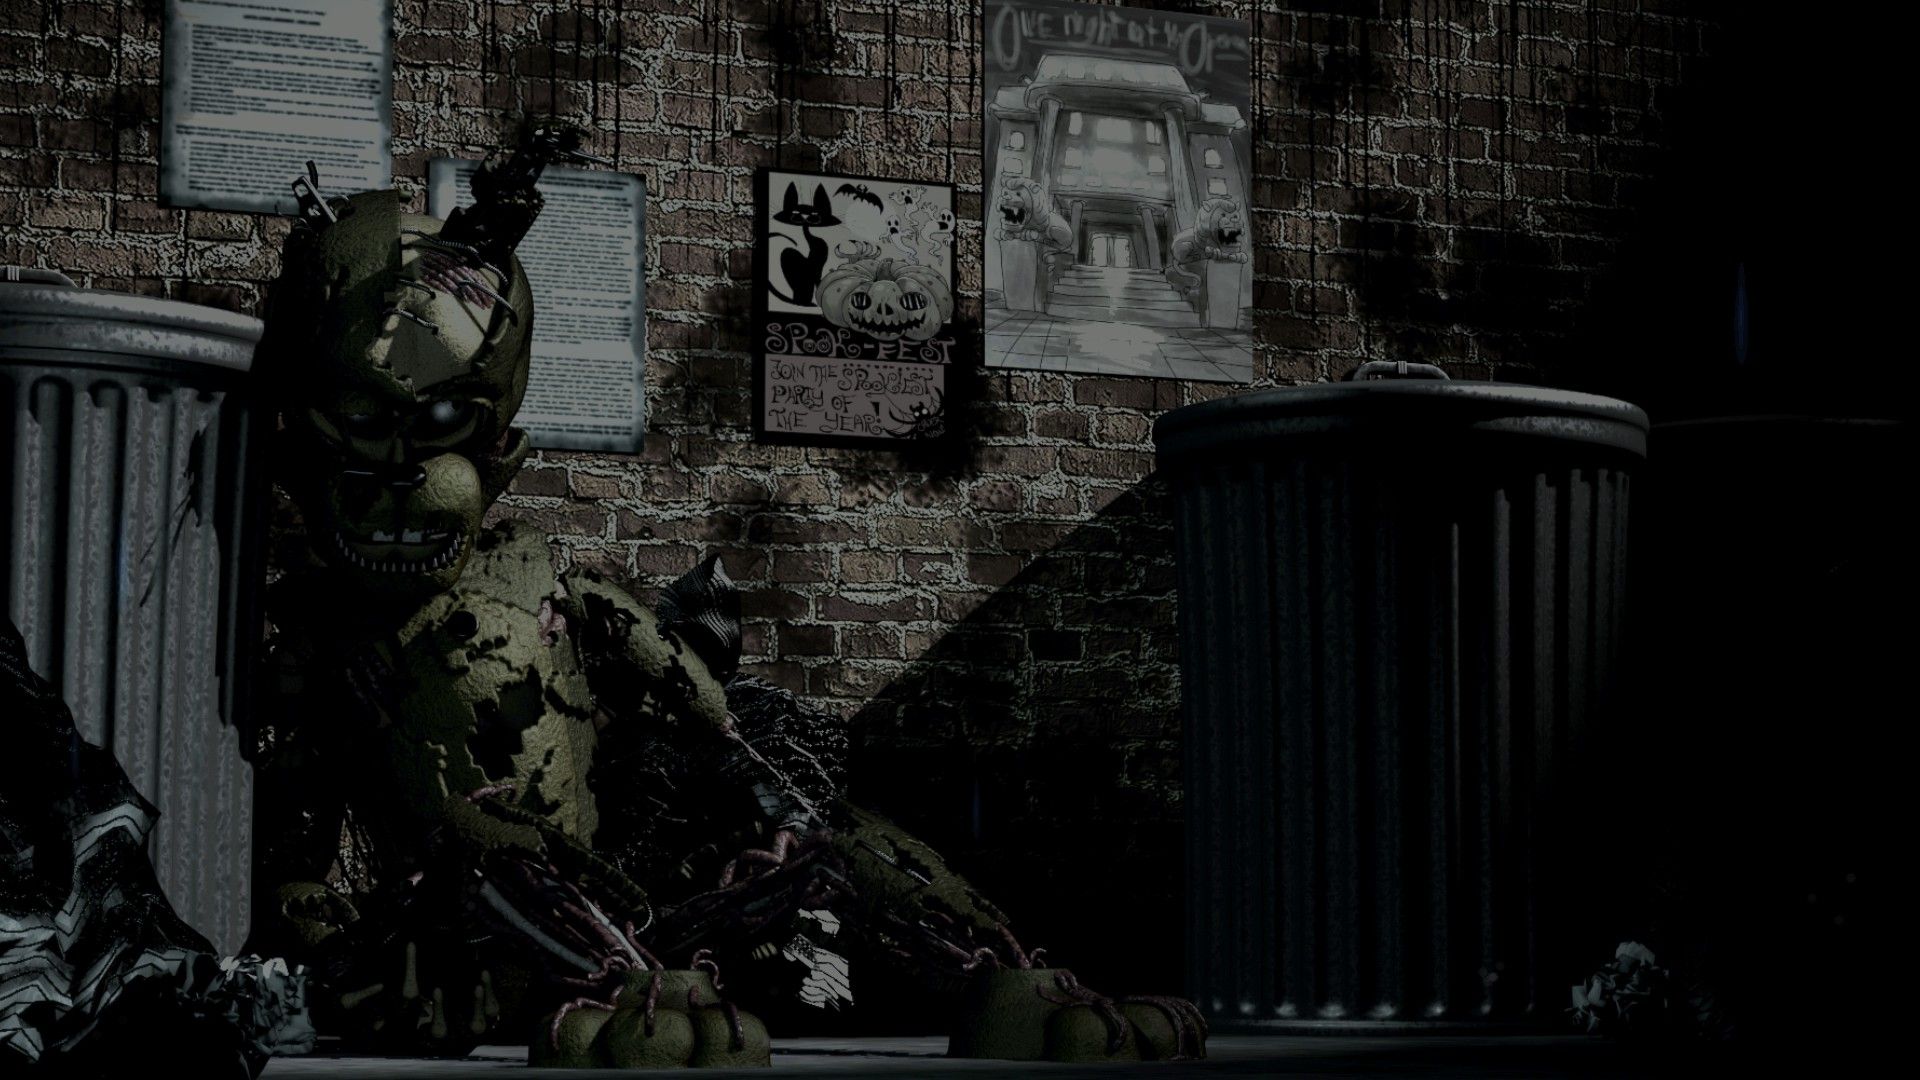 Why I like Scraptrap more than Springtrap